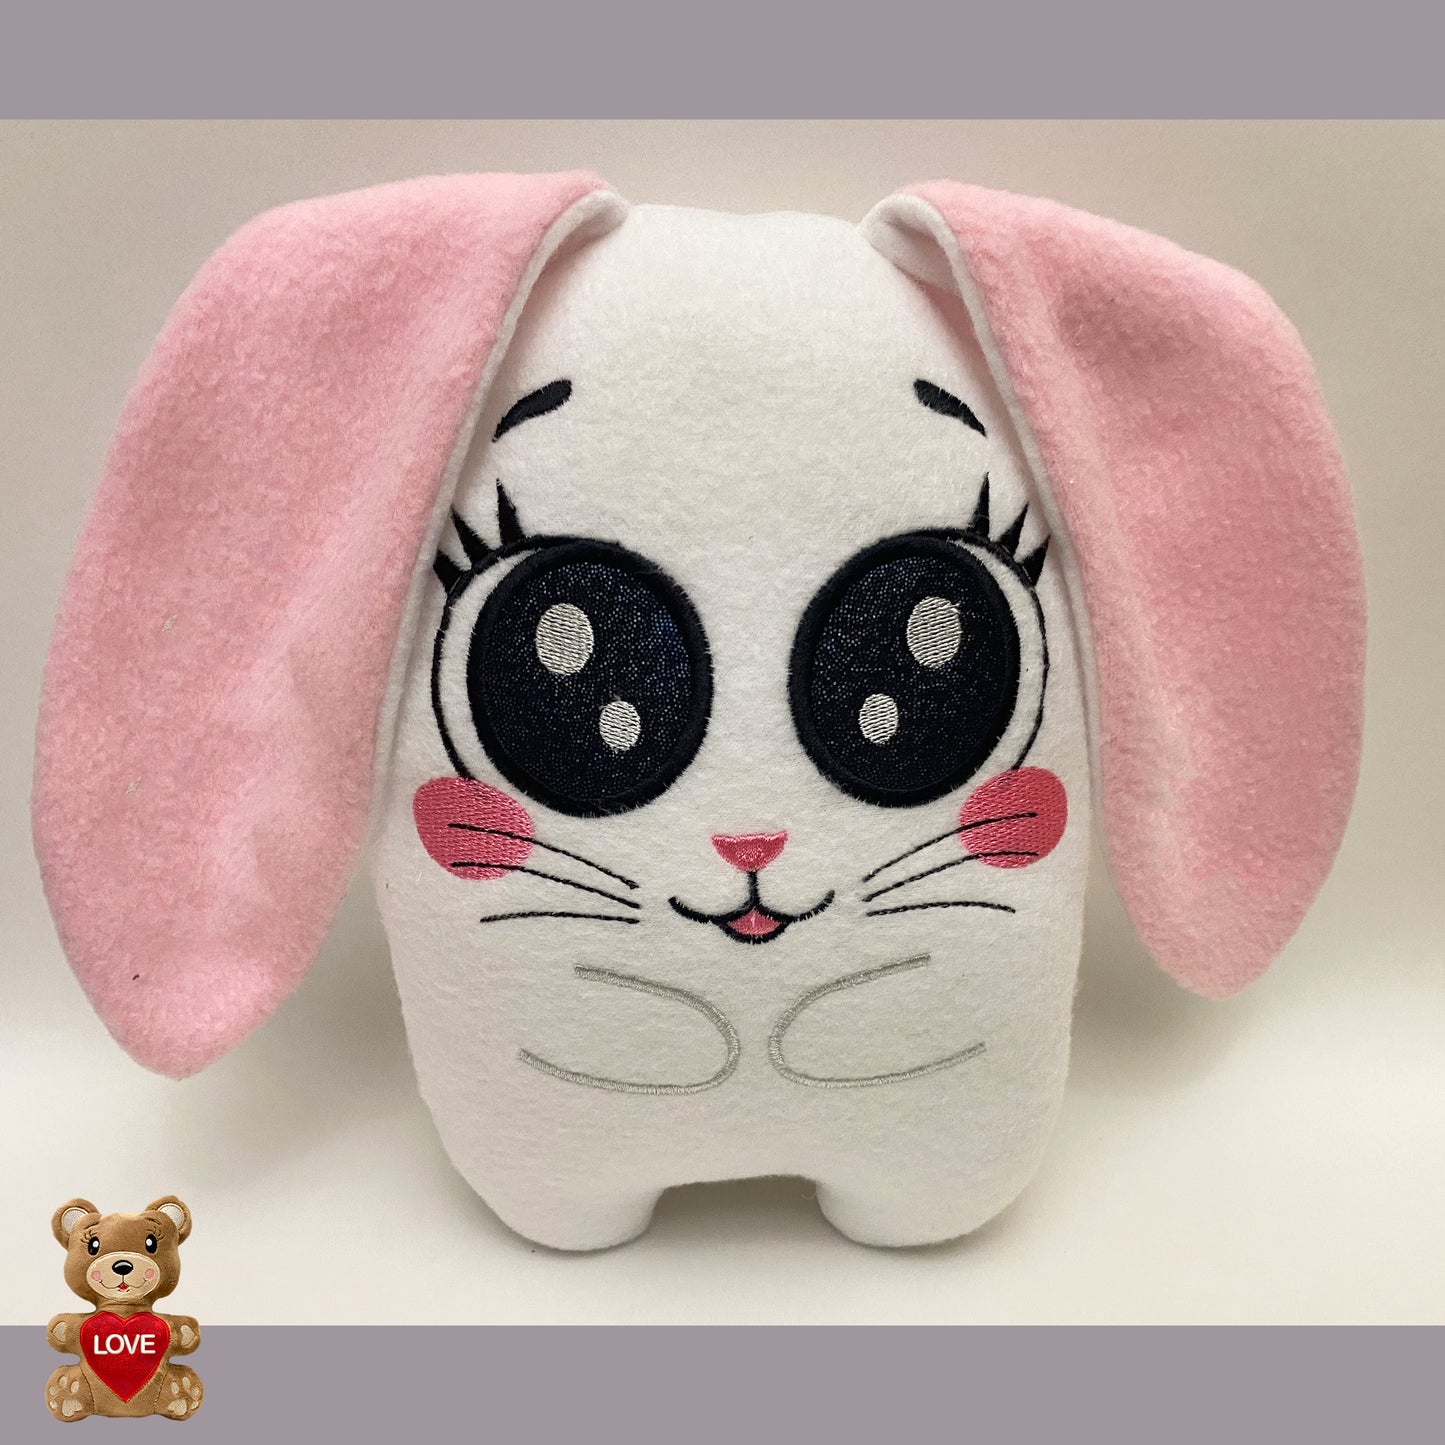 Personalised Rabbit Easter Stuffed Toy ,Super cute personalised soft plush toy